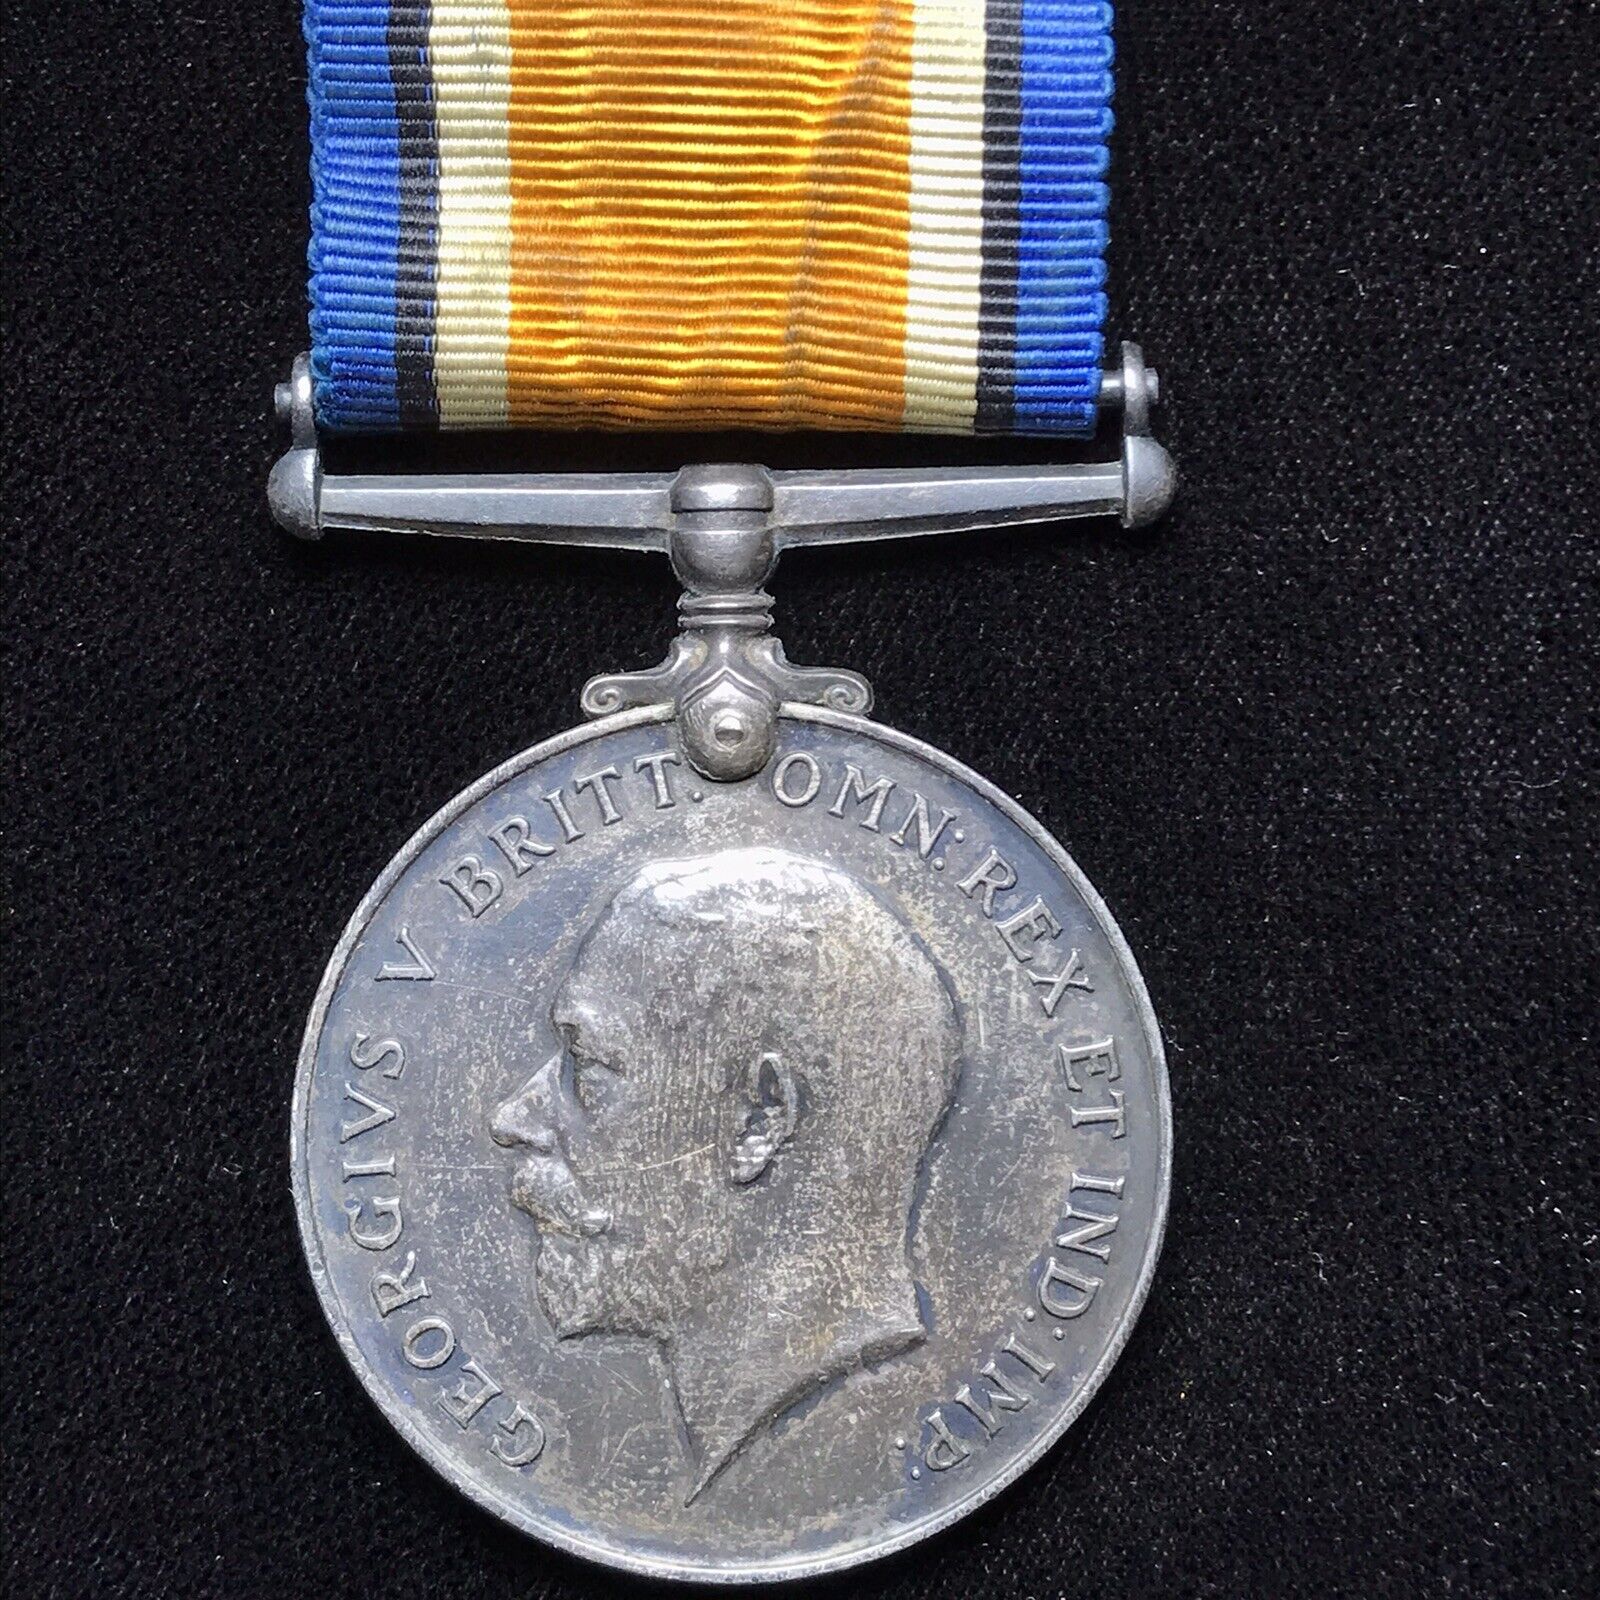 WWI 1914-18 British War Medal to 922740 Spr. G Farquharson, Canadian Engineers